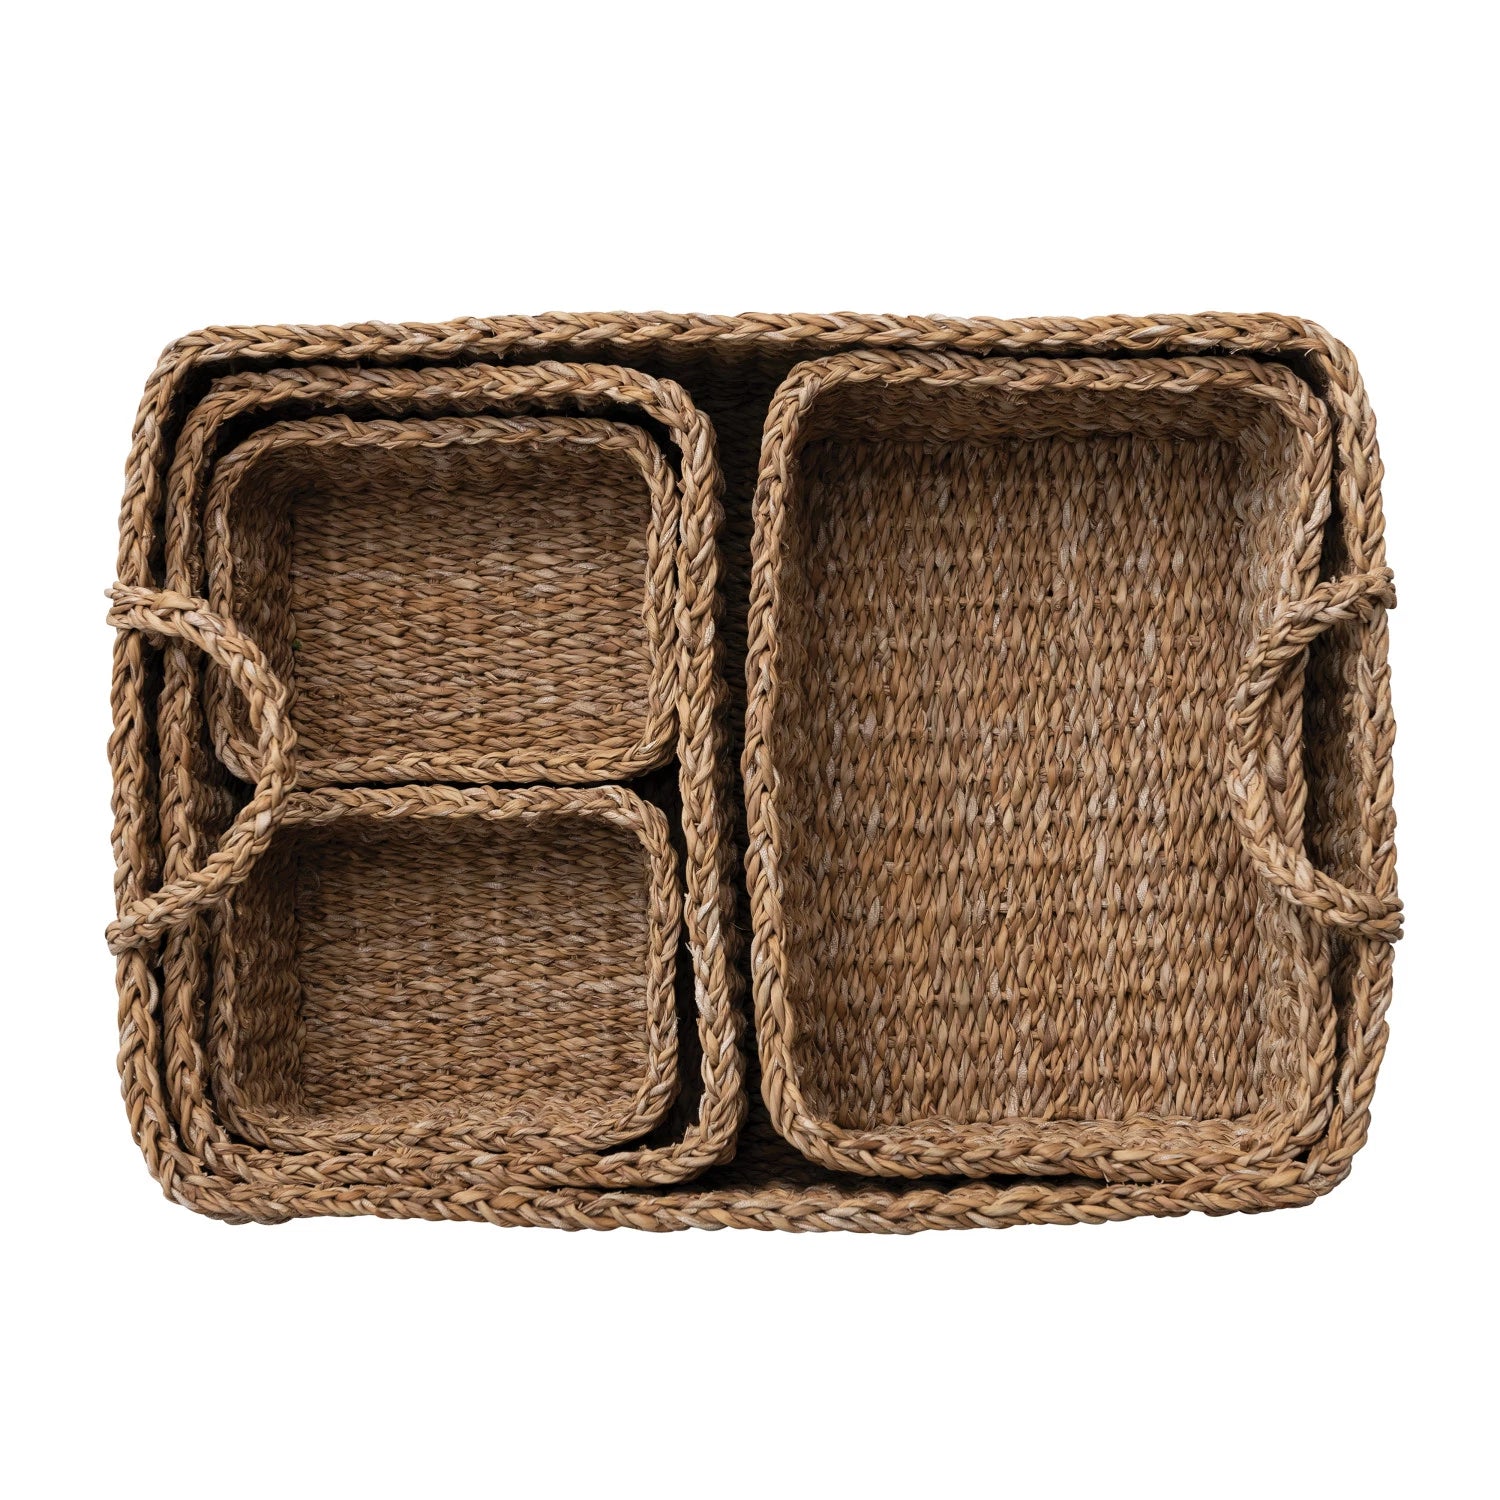 Handle Seagrass Basket, The Feathered Farmhouse